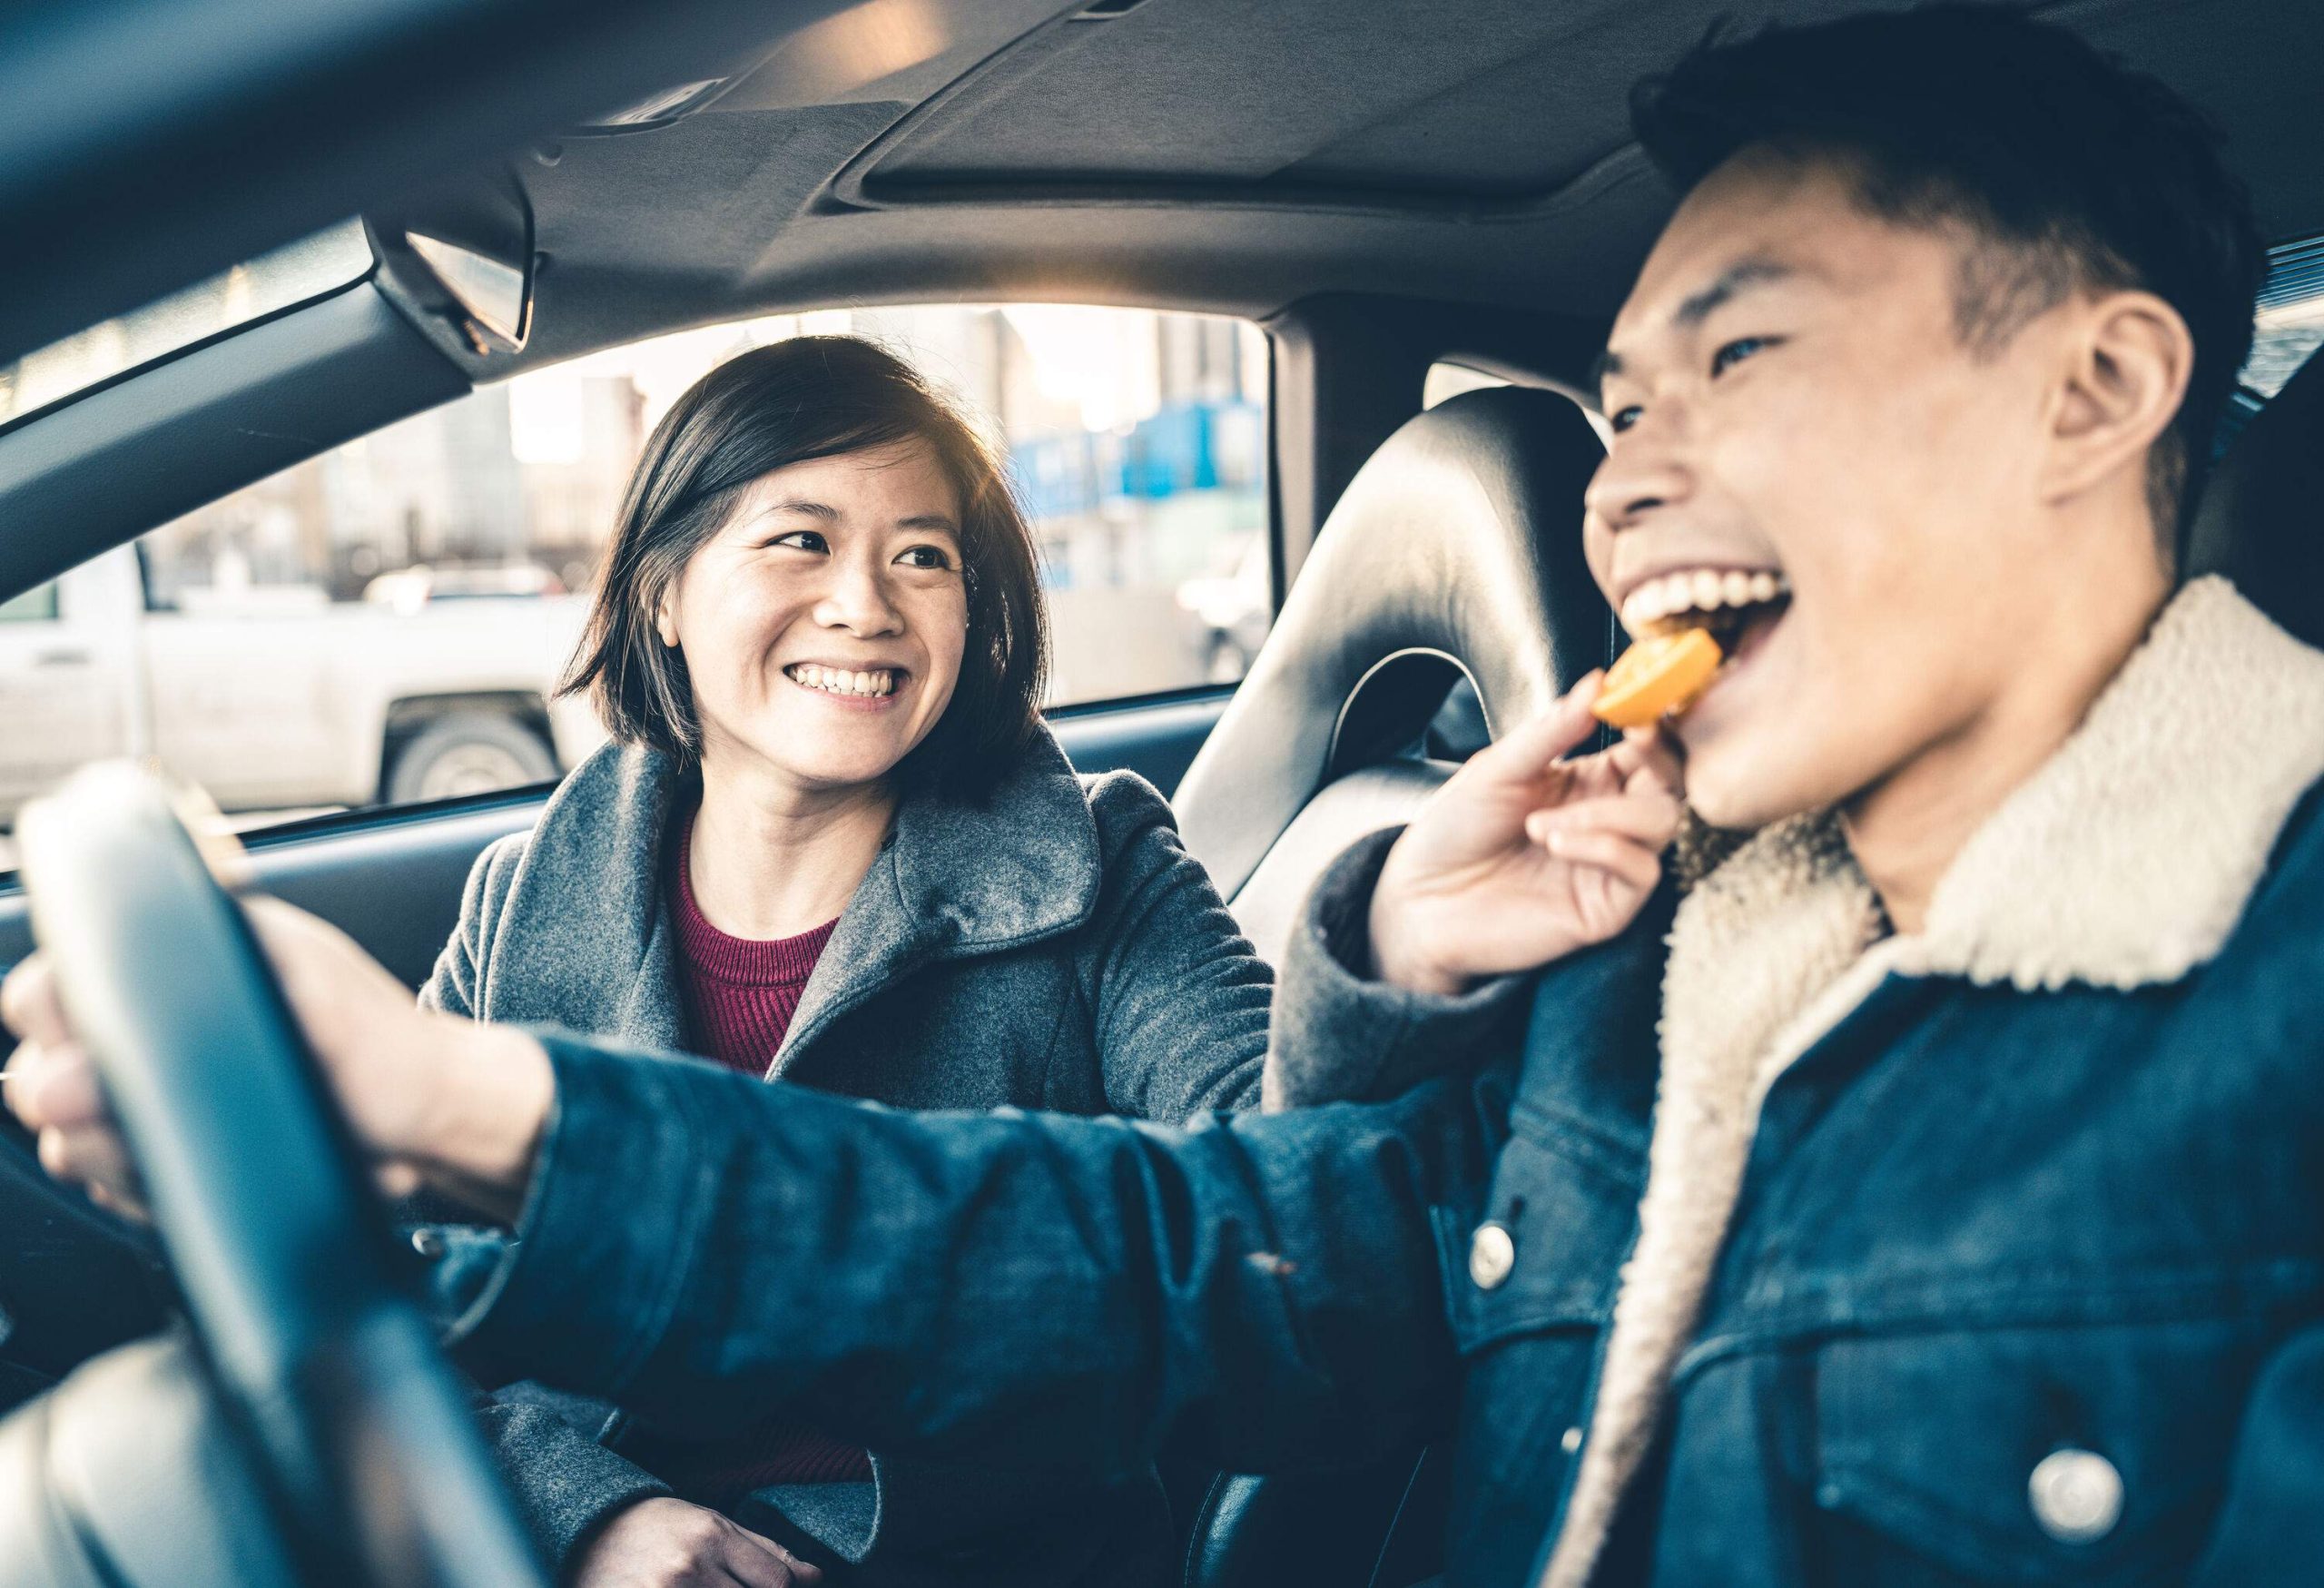 A man drives a car while a woman sitting on the passenger's seat feeds him a cookie.